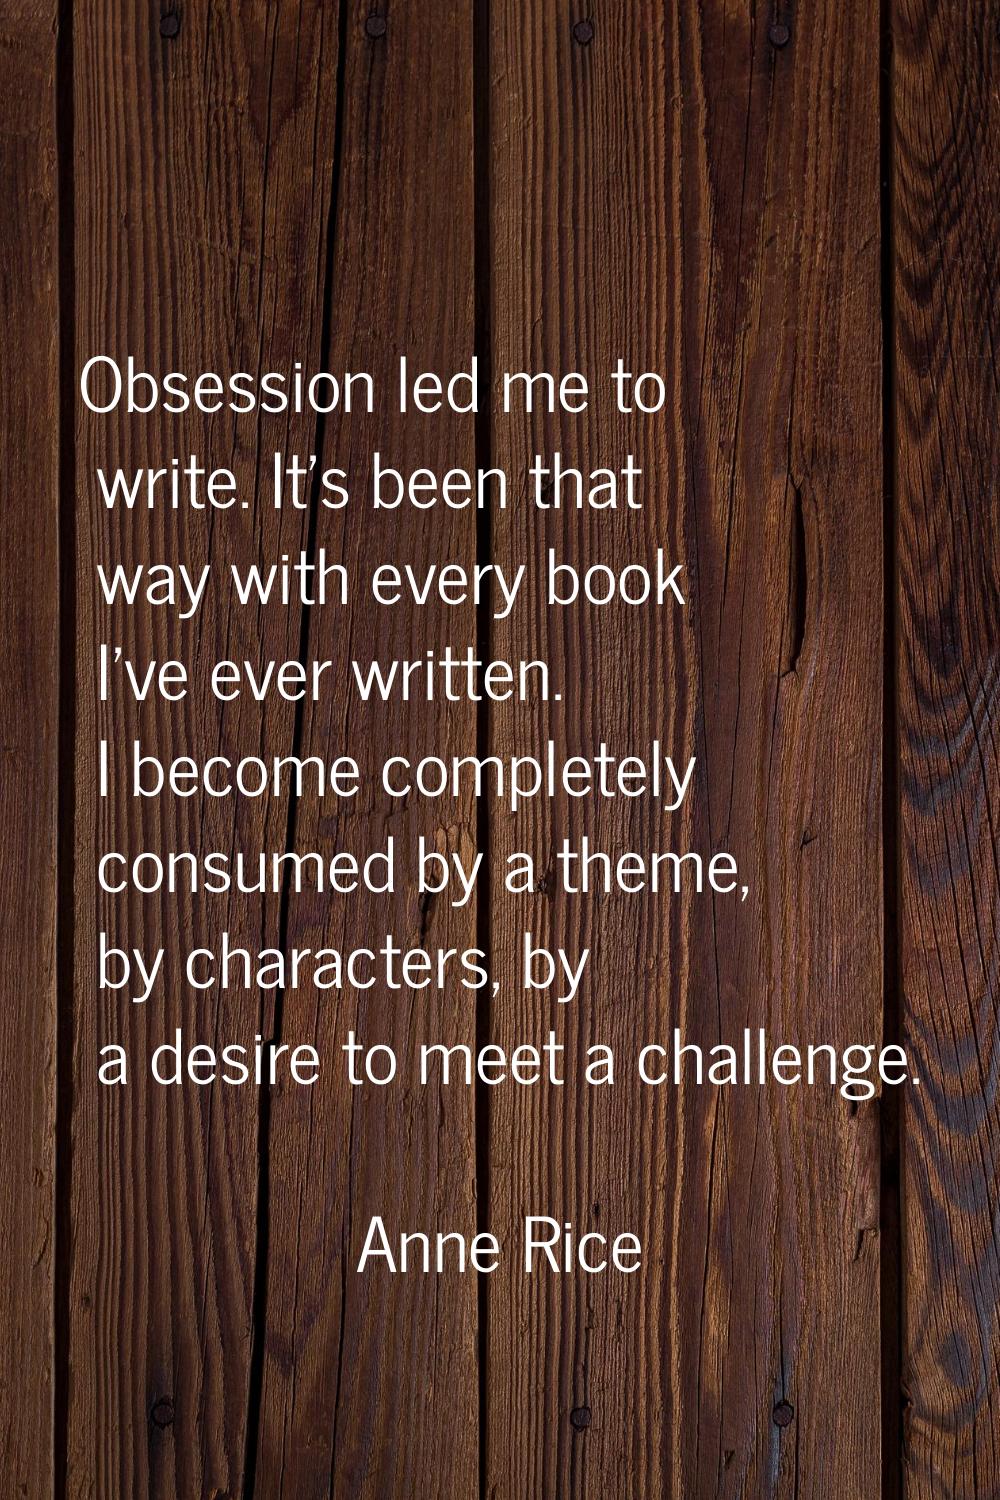 Obsession led me to write. It's been that way with every book I've ever written. I become completel